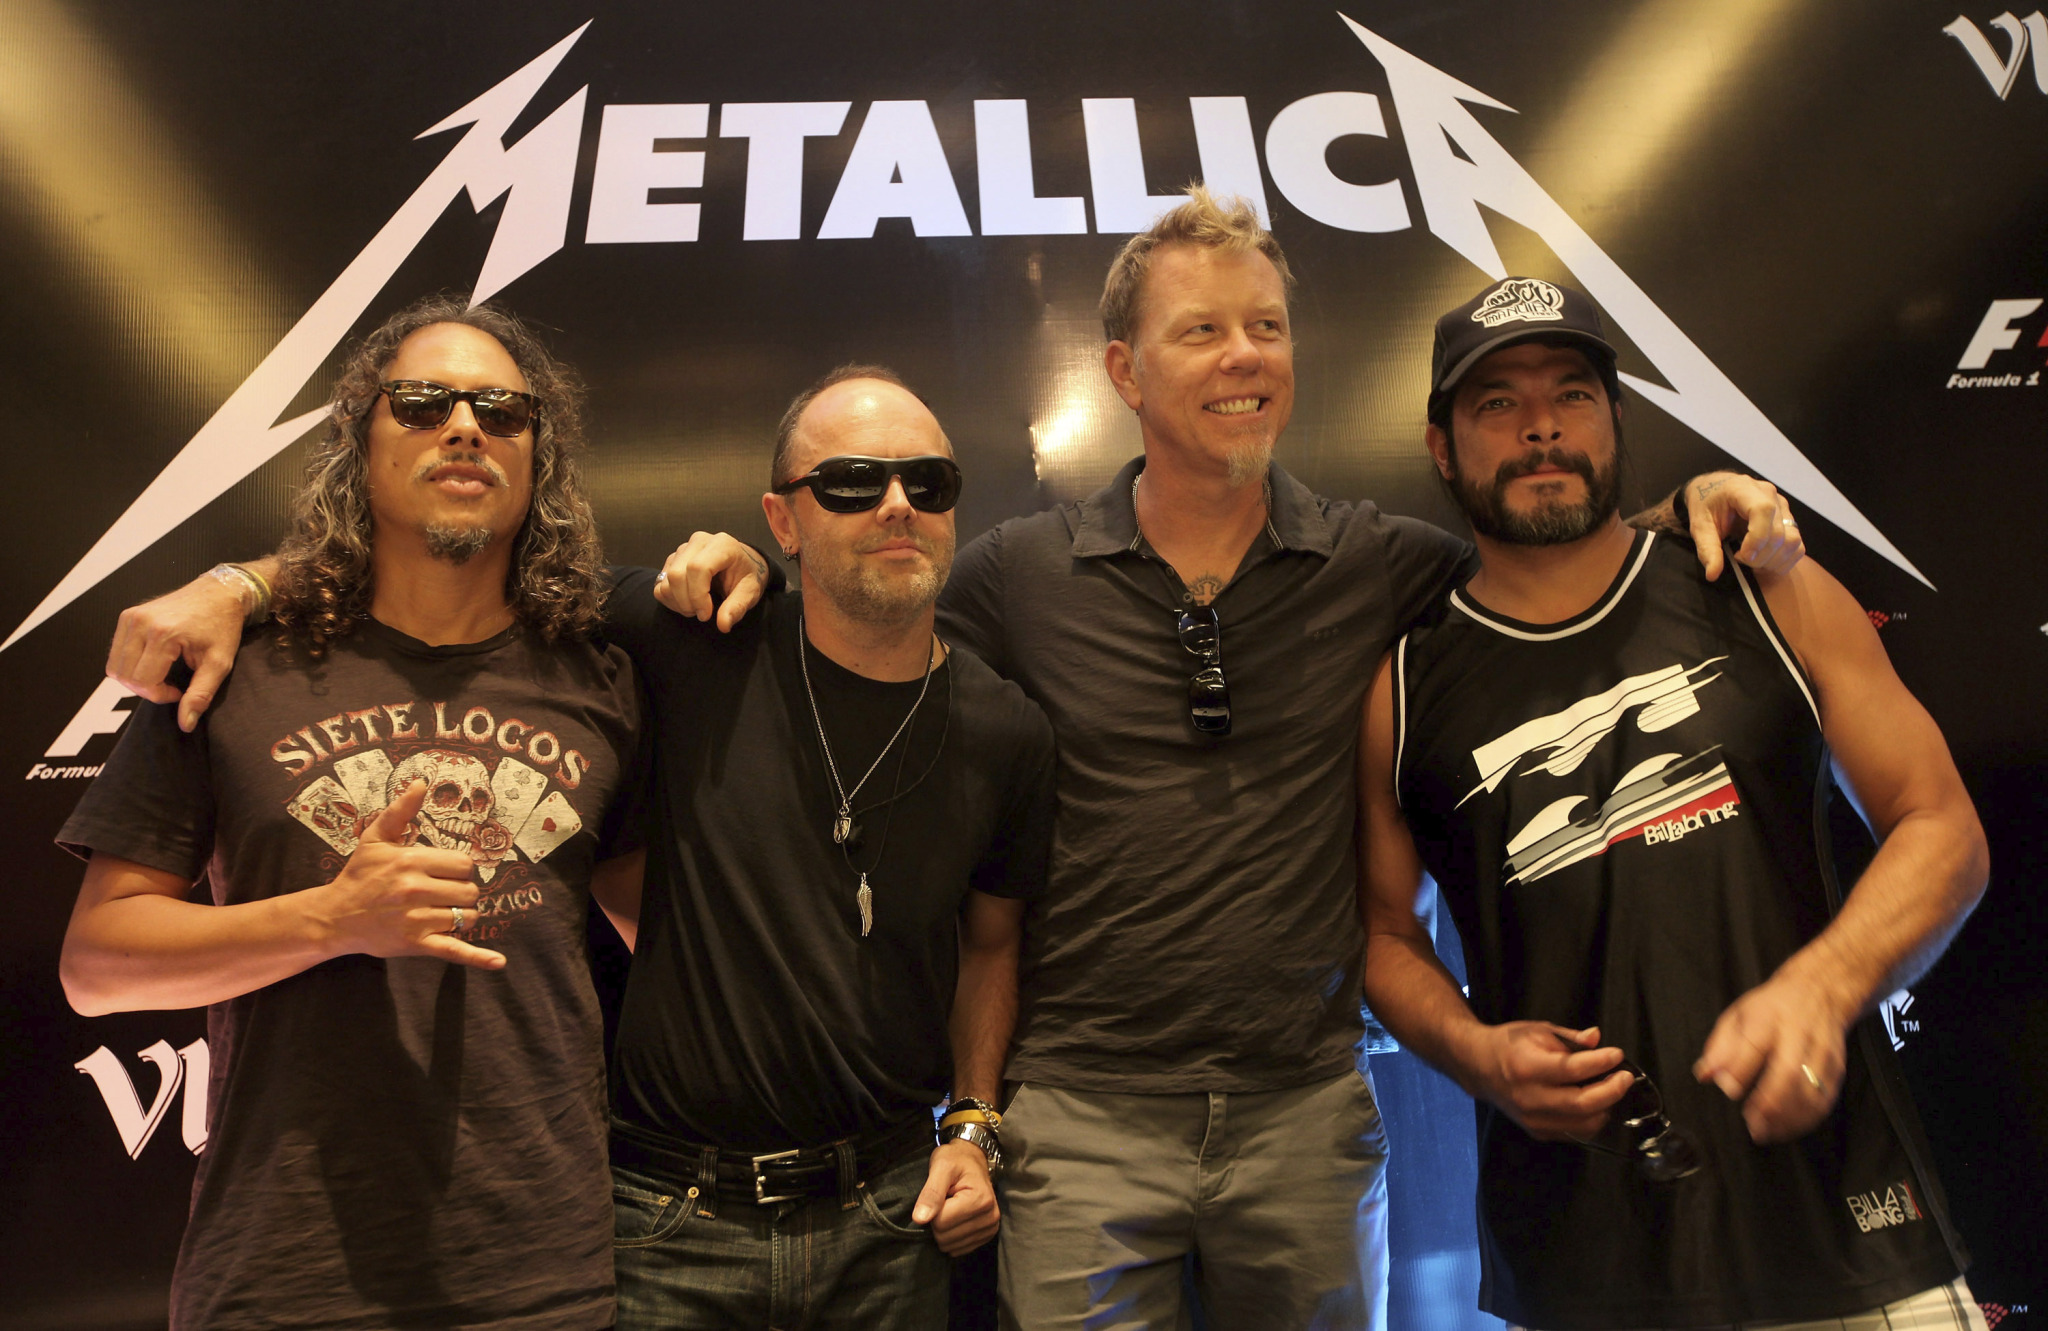 METALLICA Chicago Metro 2021 September 20 – Master Of Puppets – front row